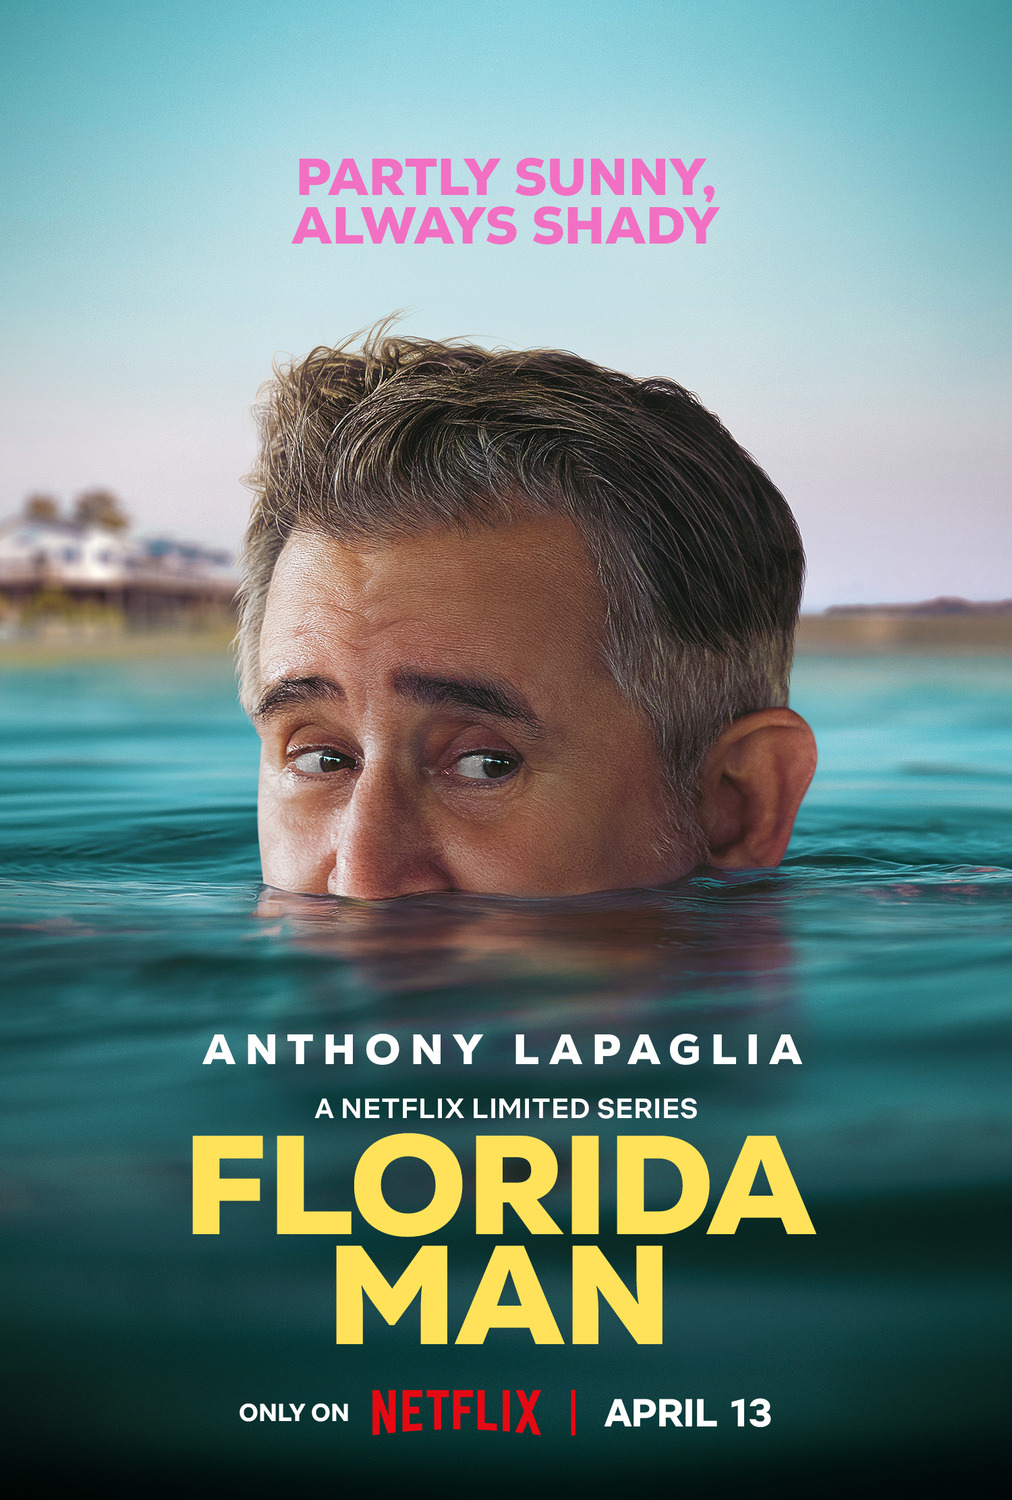 Extra Large TV Poster Image for Florida Man (#5 of 20)